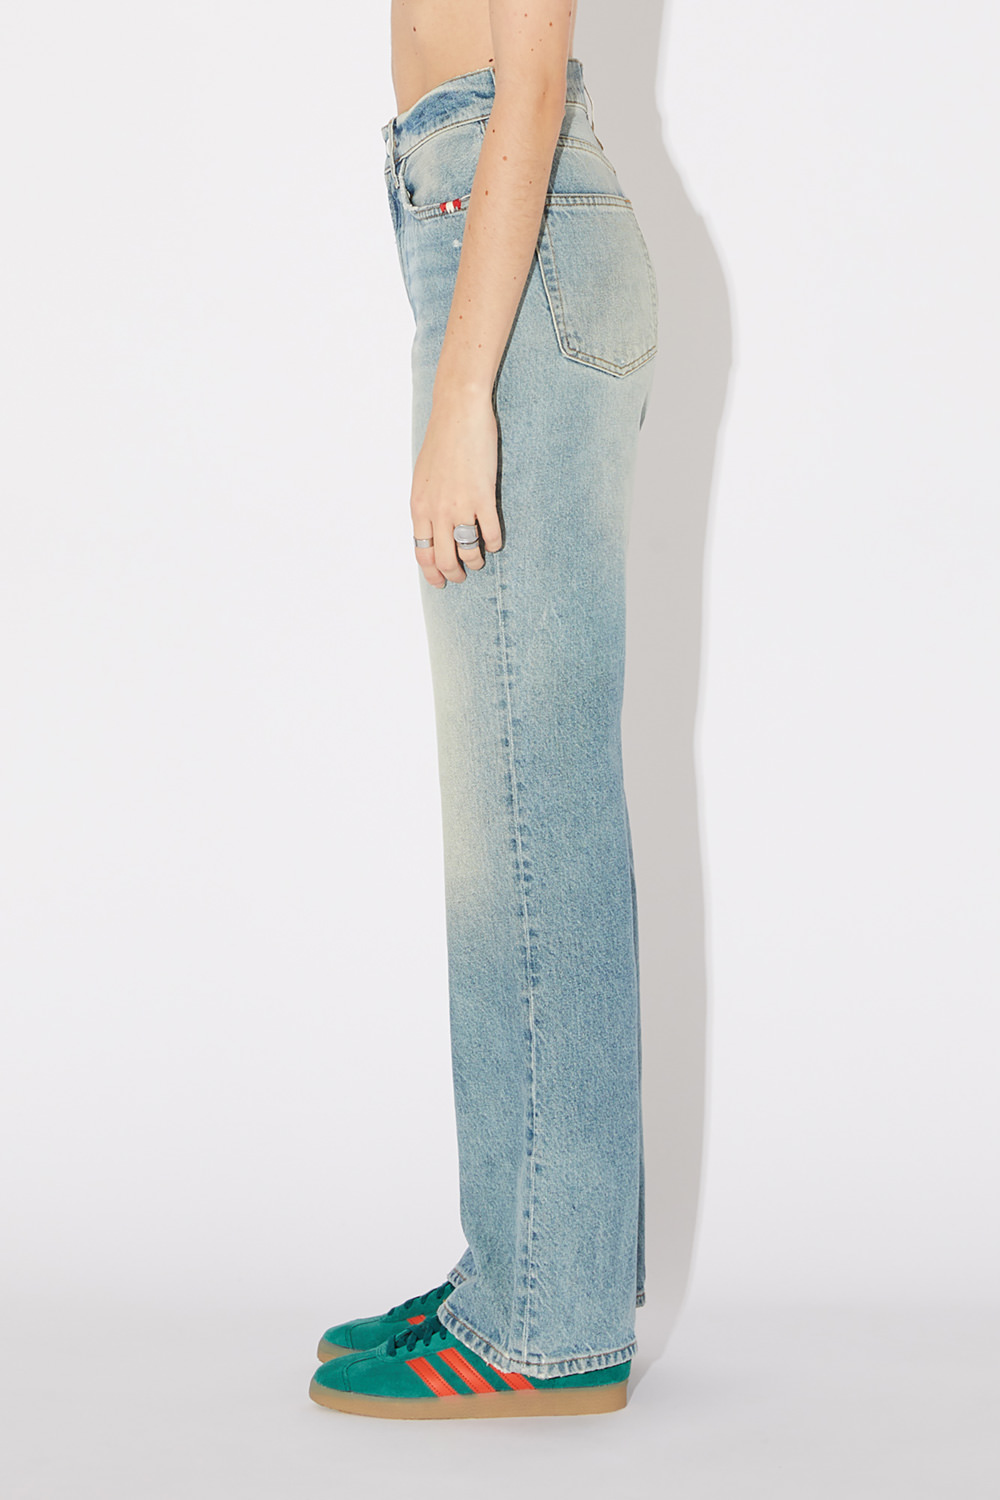 AMISH: JEANS KENDALL REAL VINTAGE